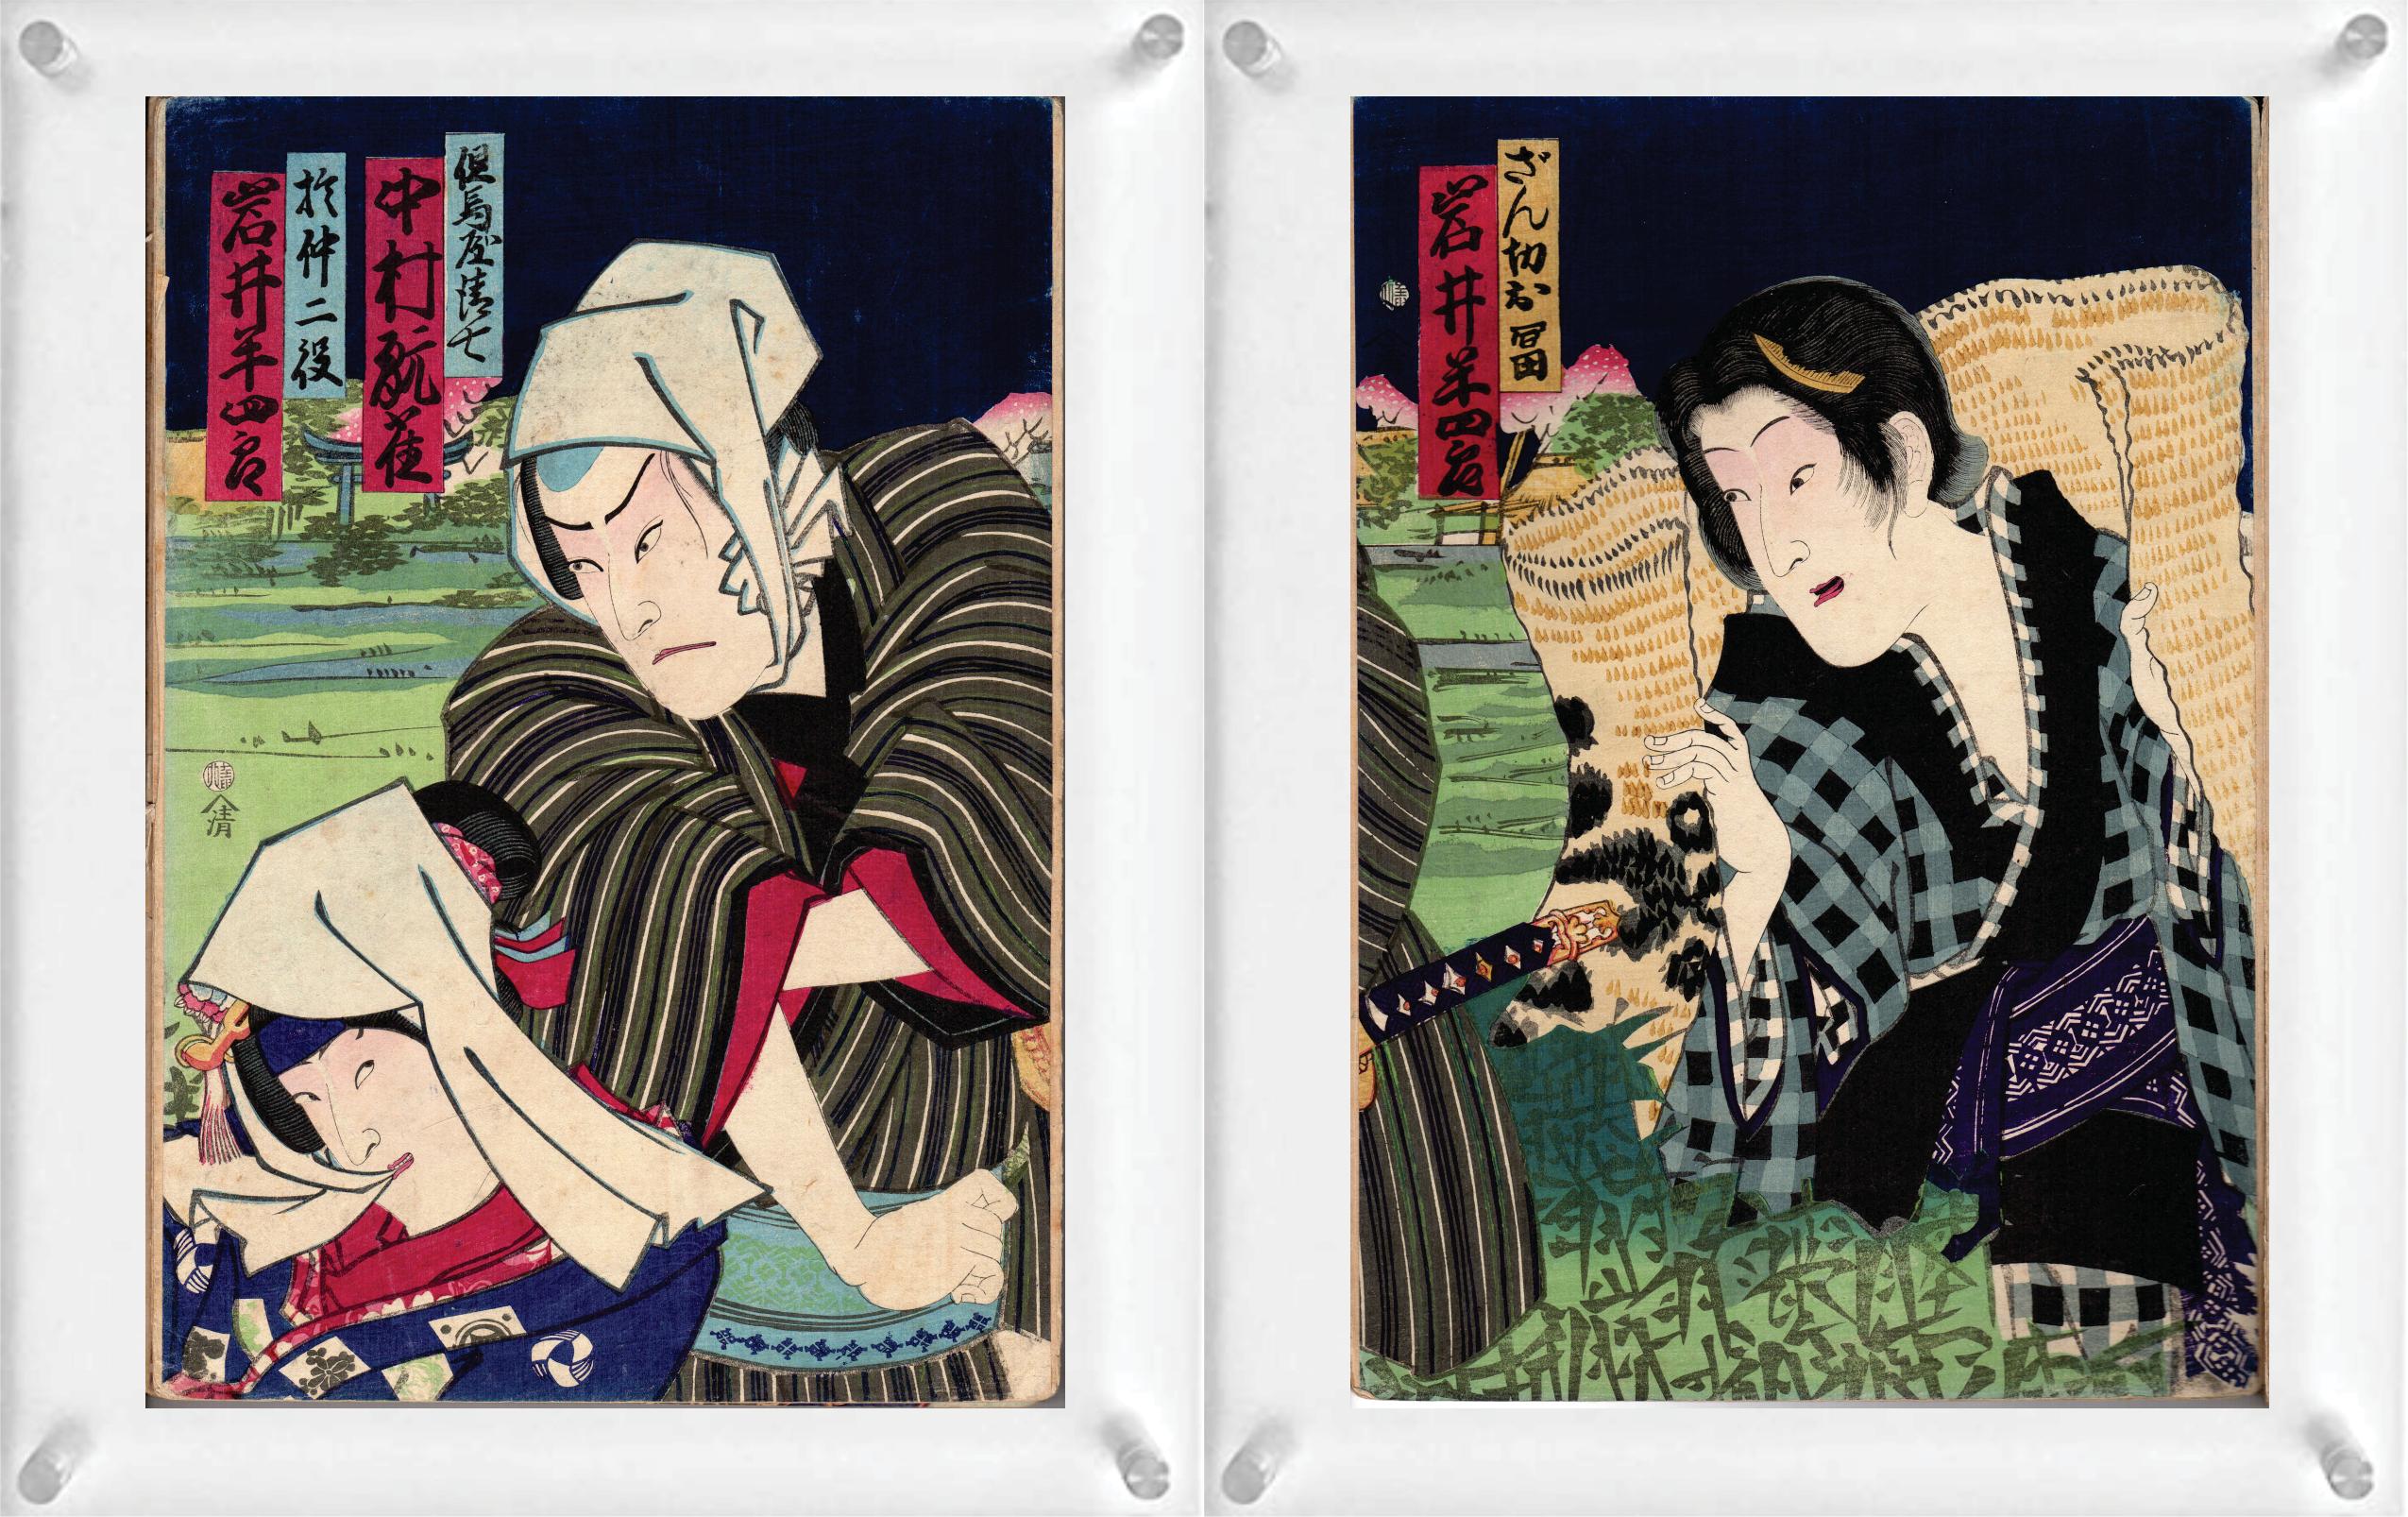 4 Japanese Woodblock Prints (Double-Side) by Toyohara Kunichika (Diptych), and Shosai Ikkei - from Thirty-Six Comics of the Famous Places of Tokyo.

Note: These are only two pieces of woodblock prints with 4 images. They are double-sided with two